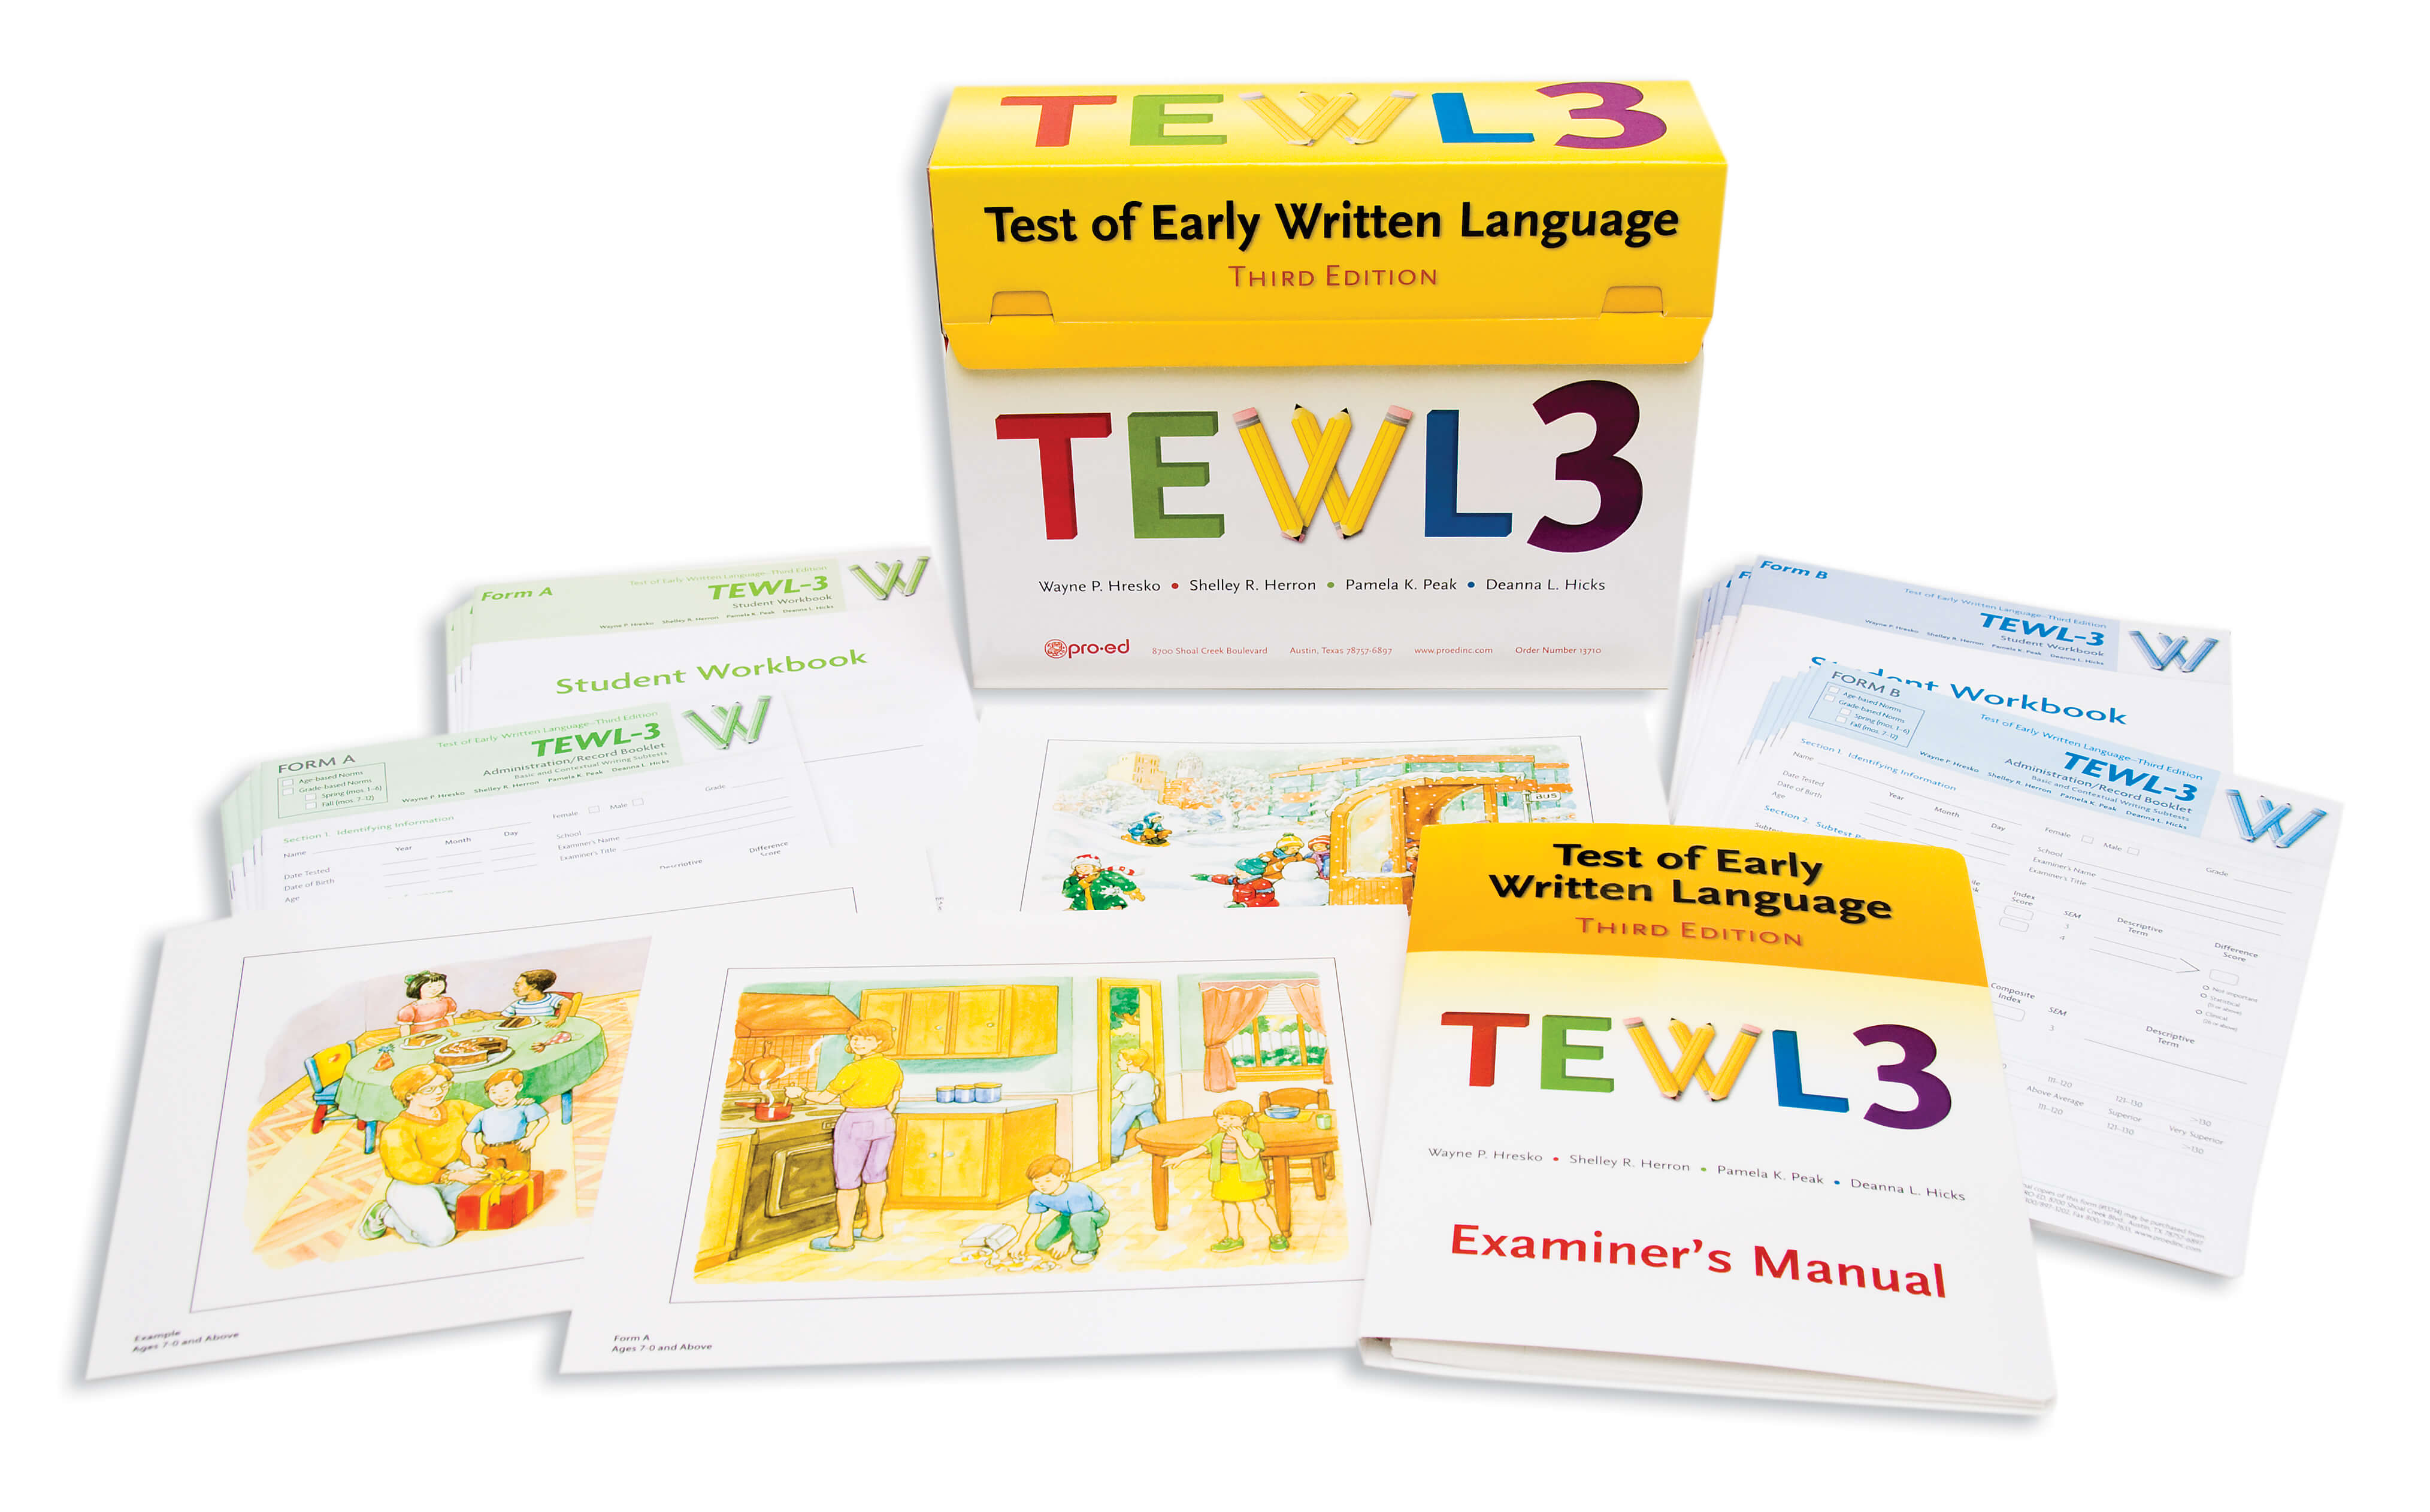 TEWL-3 Test of Early Written Language 3rd Ed - 